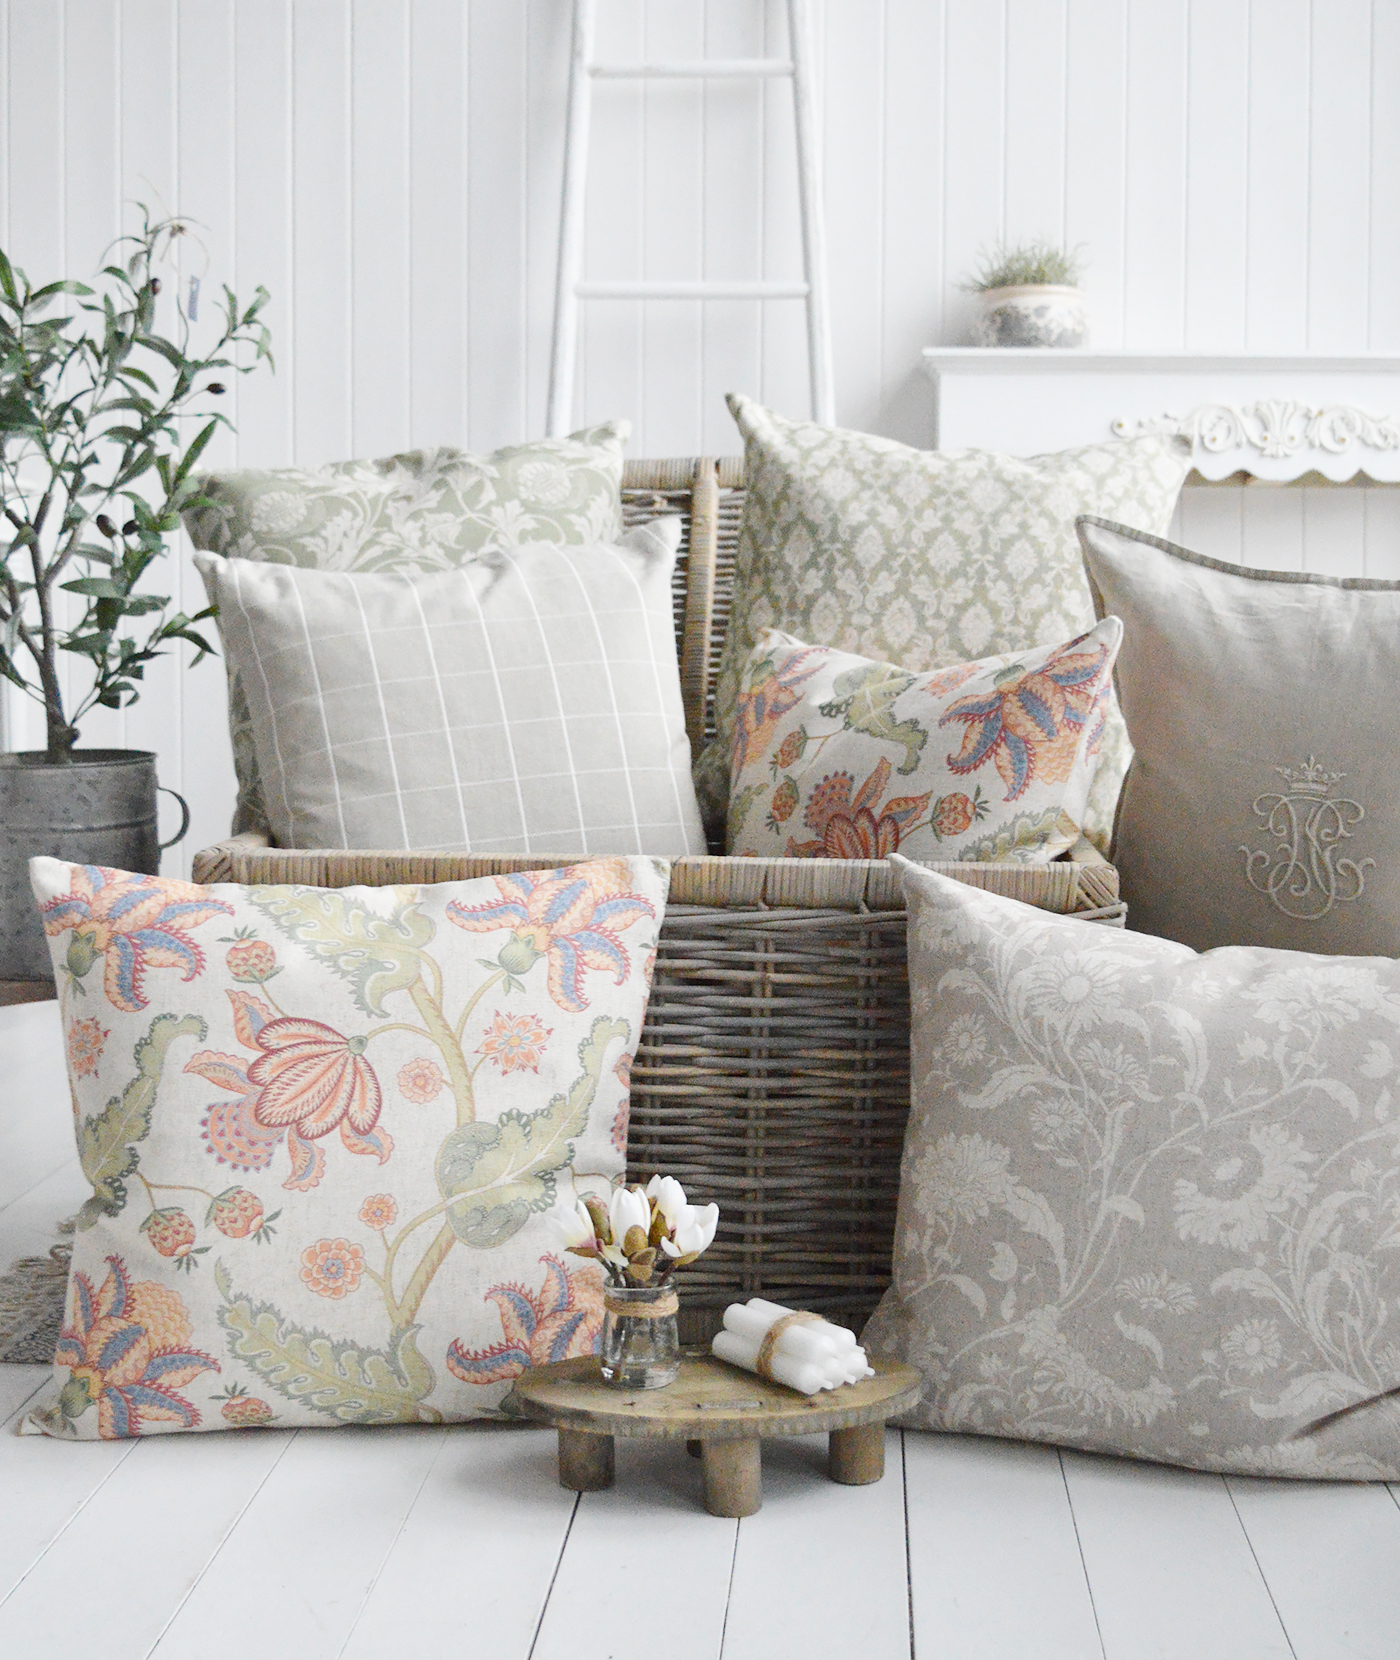 Luxury New England cushions for modern farmhouse, country and coastal decor and interiors.